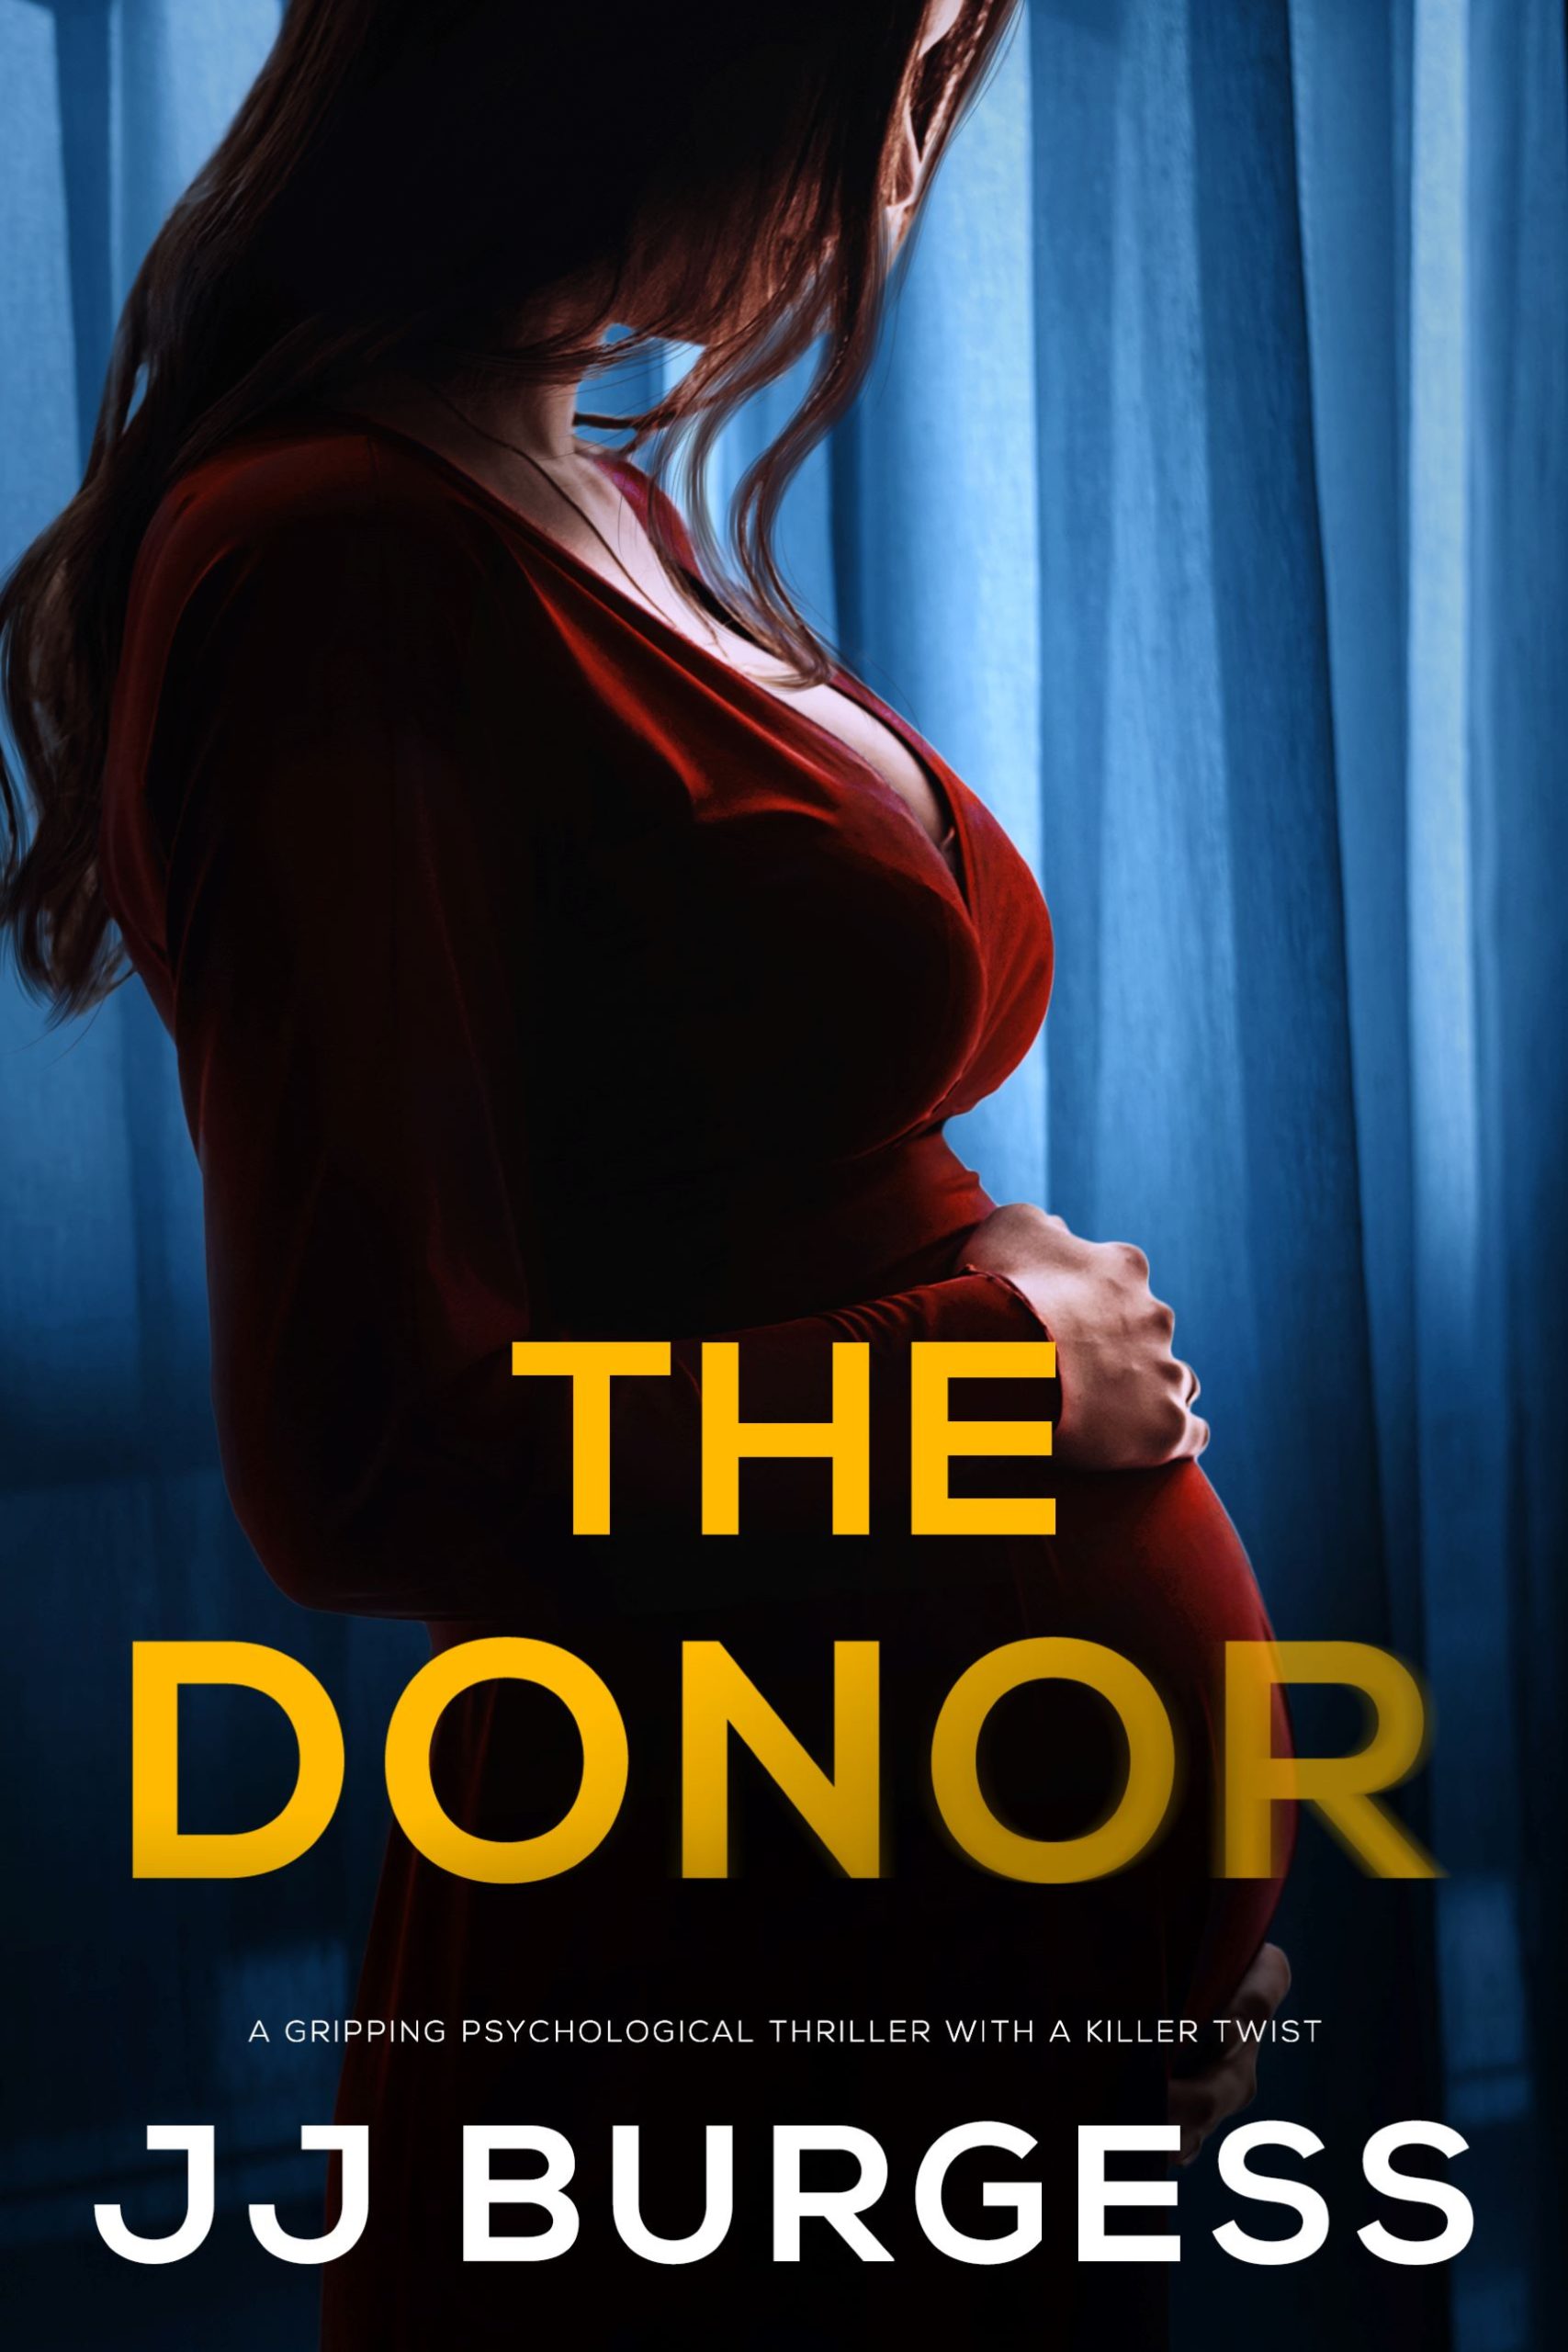 JJ BURGESS NEW RELEASE – THE DONOR